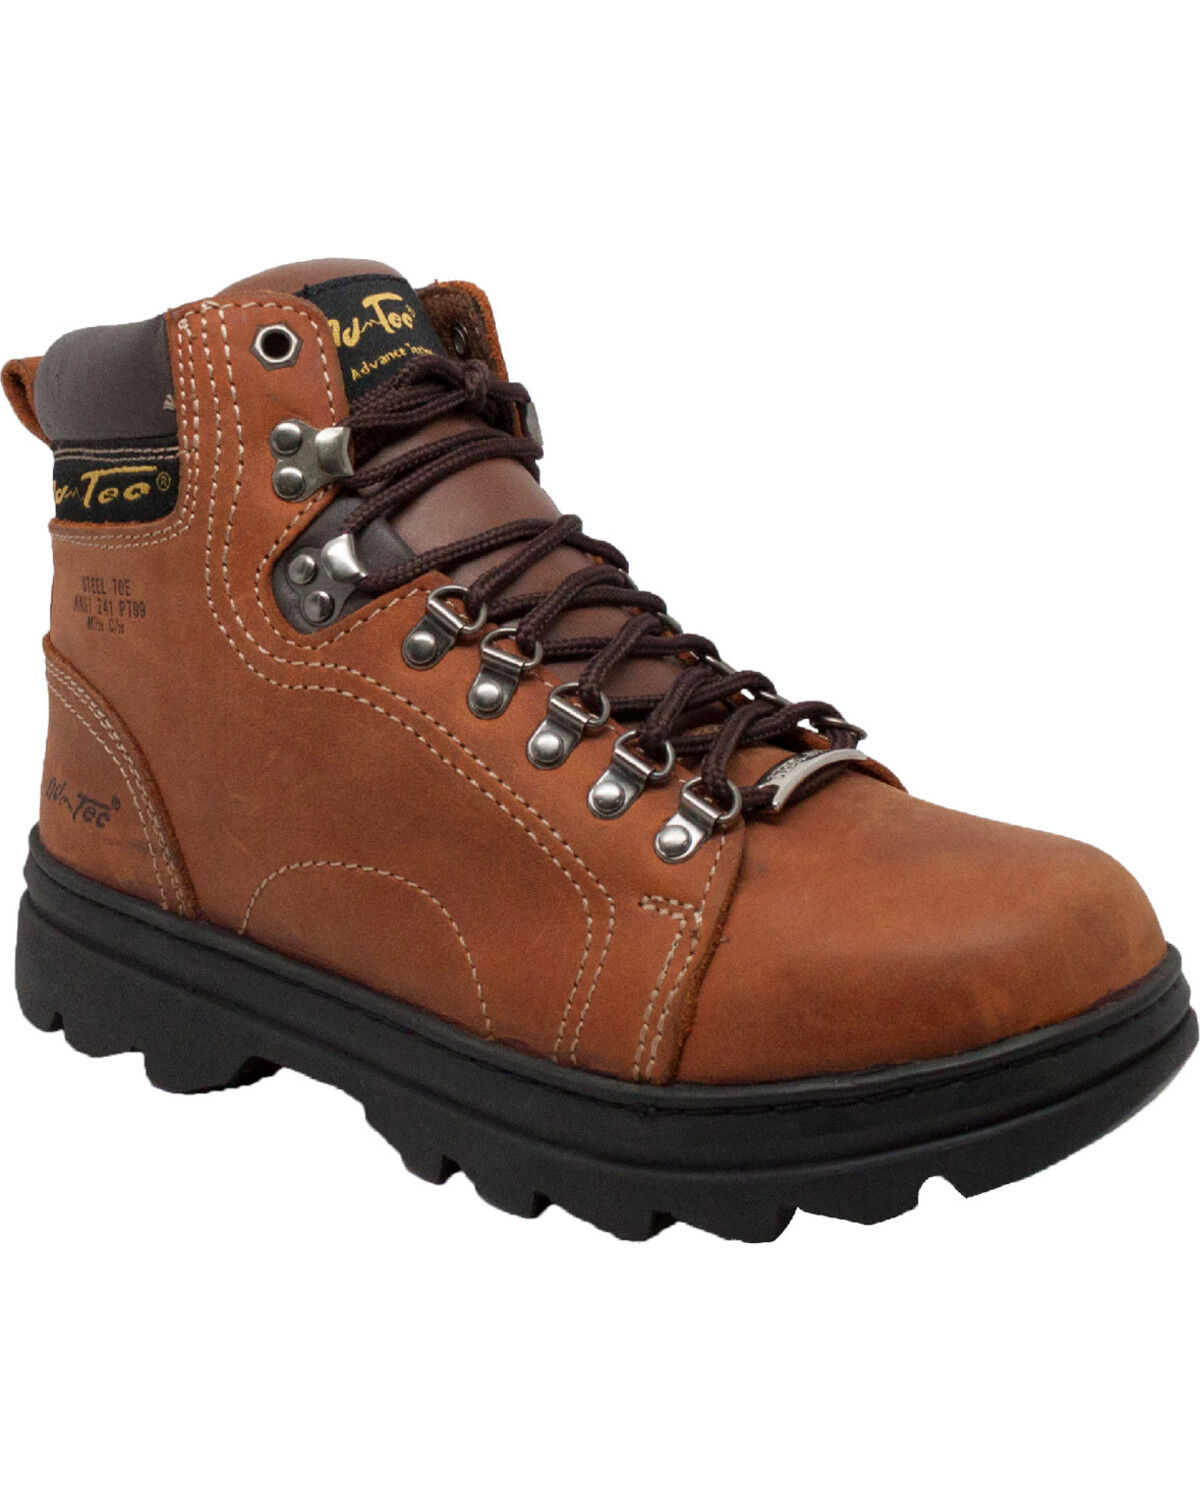 Ad Tec 8in Certified Steel Toe Safety Work Boots for Men Brown Tumbled Leather with Protective Rubber Cap & Slip Resistant Dual Density Rubber Outsole 